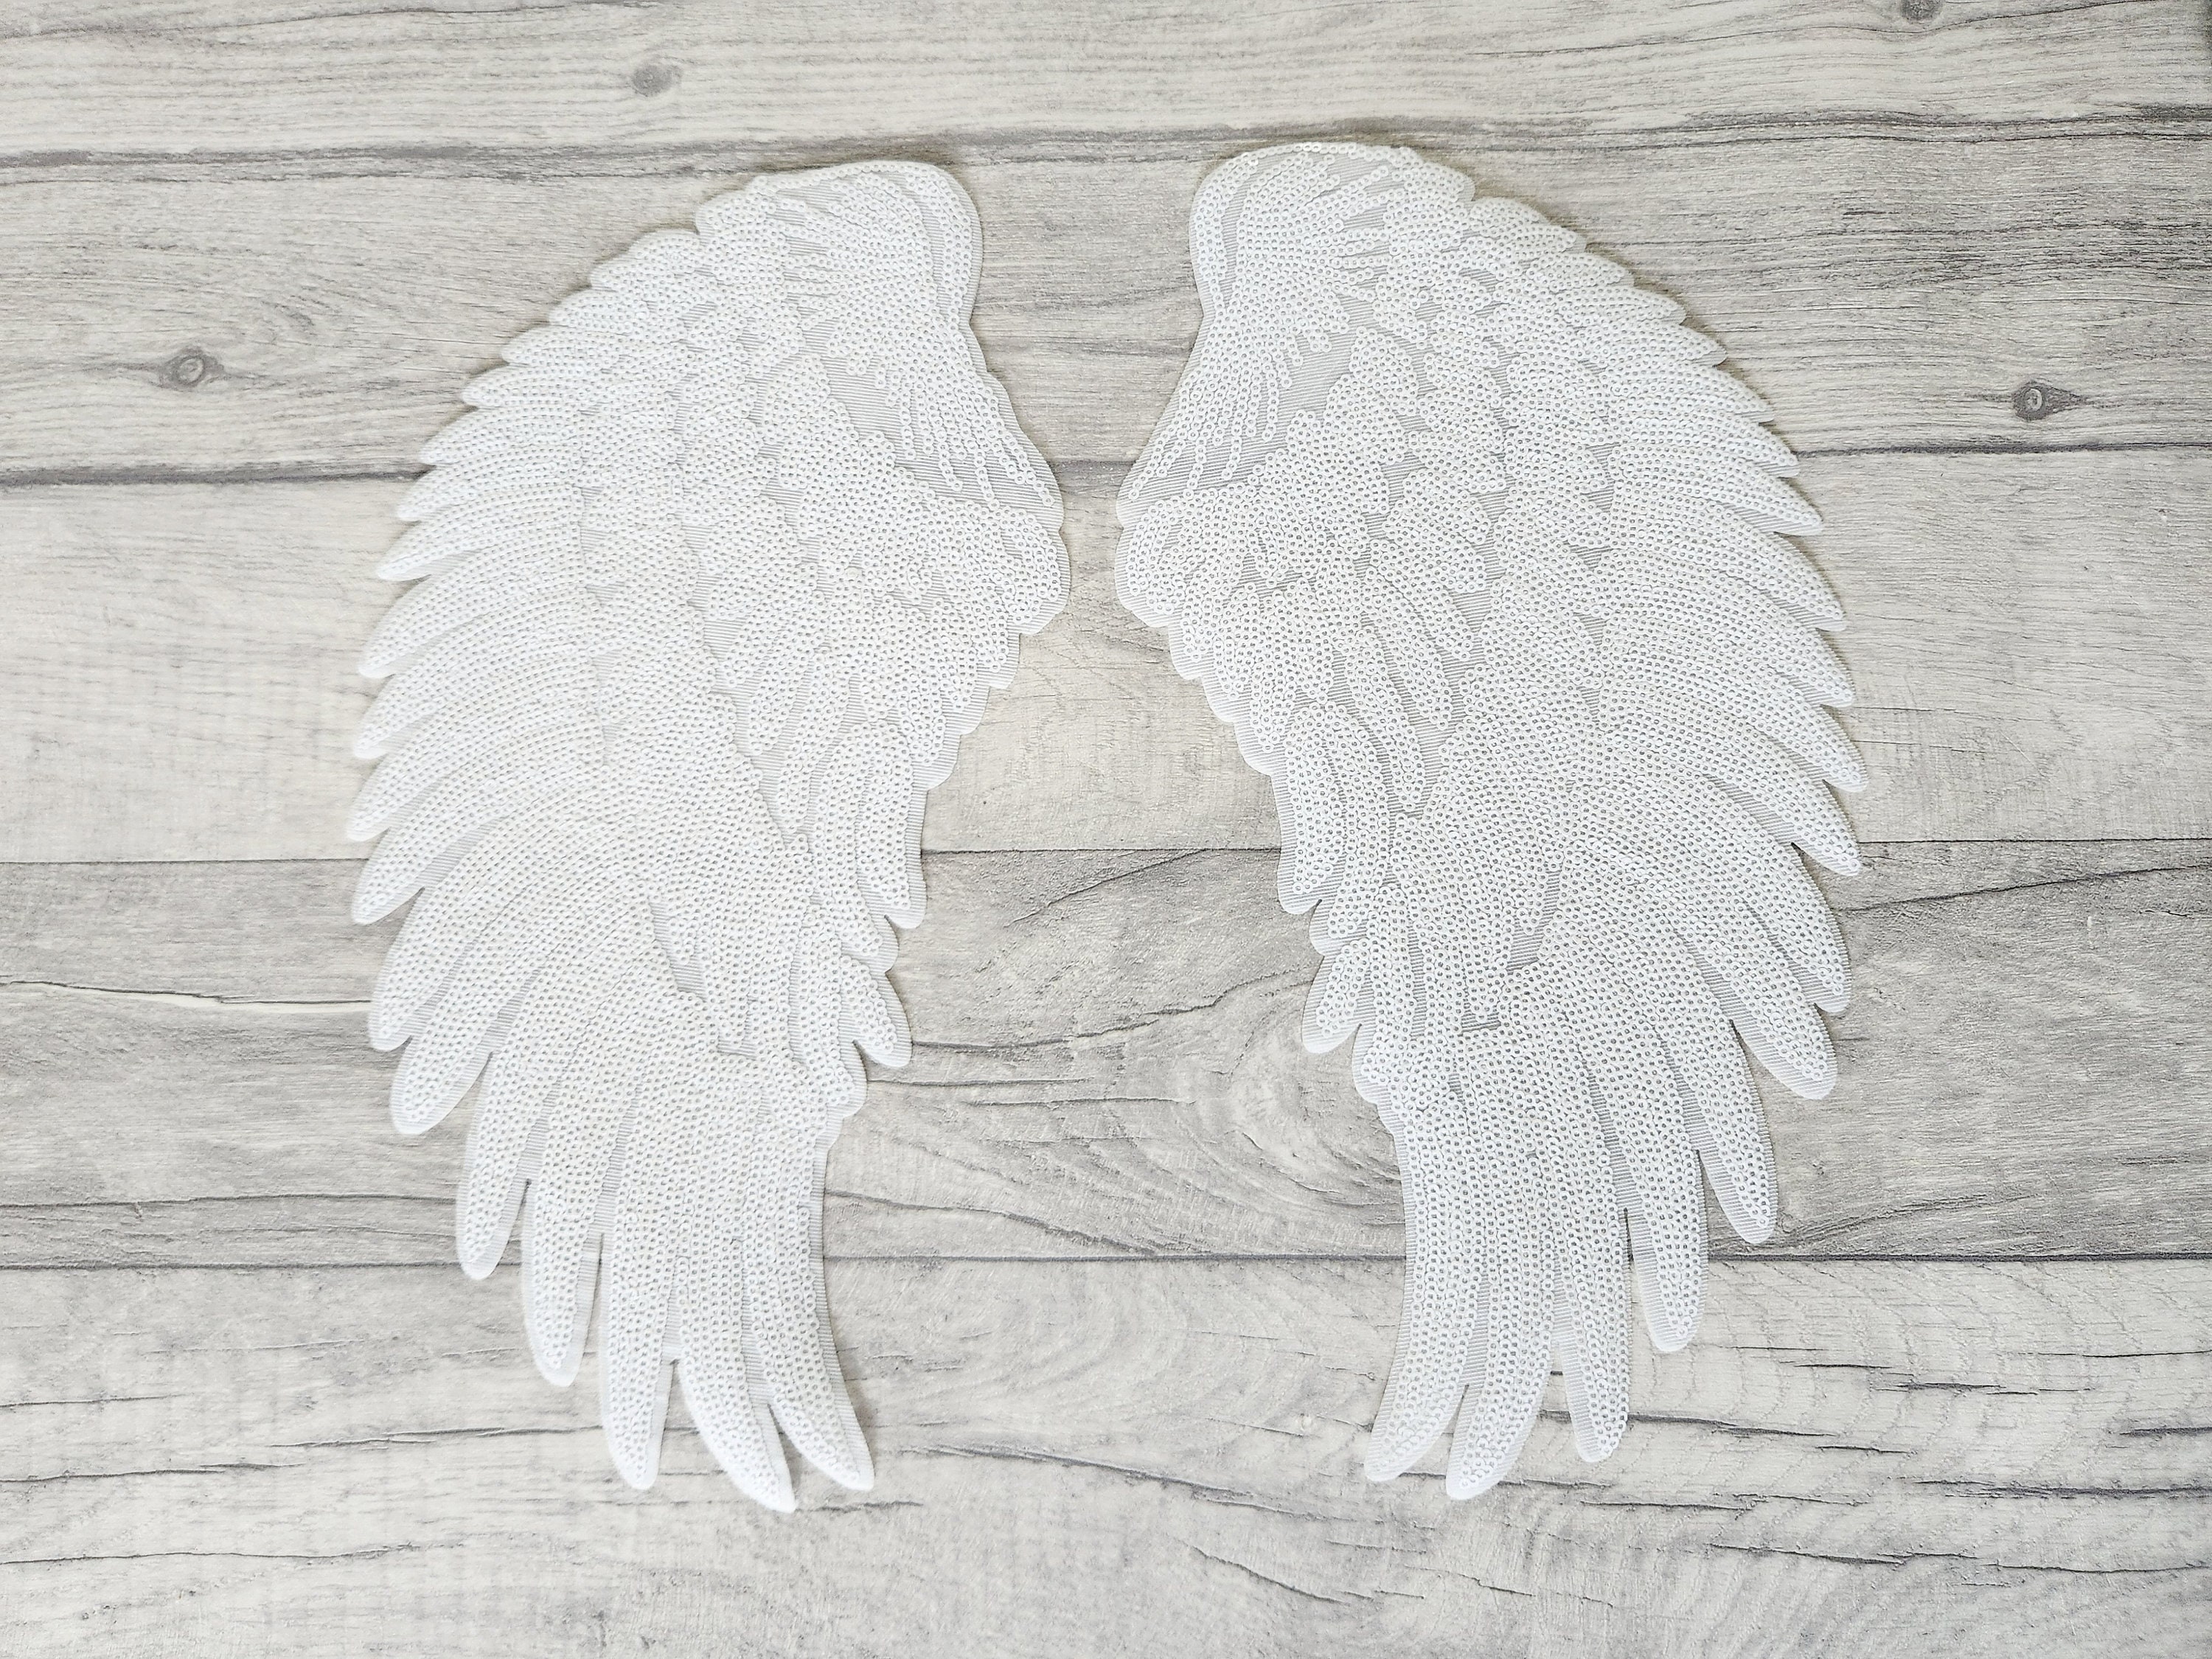 Angel Wings for Crafting Fabric Sew on Patch Appliqué Padded Fairy Wings UK  Seller -  Sweden